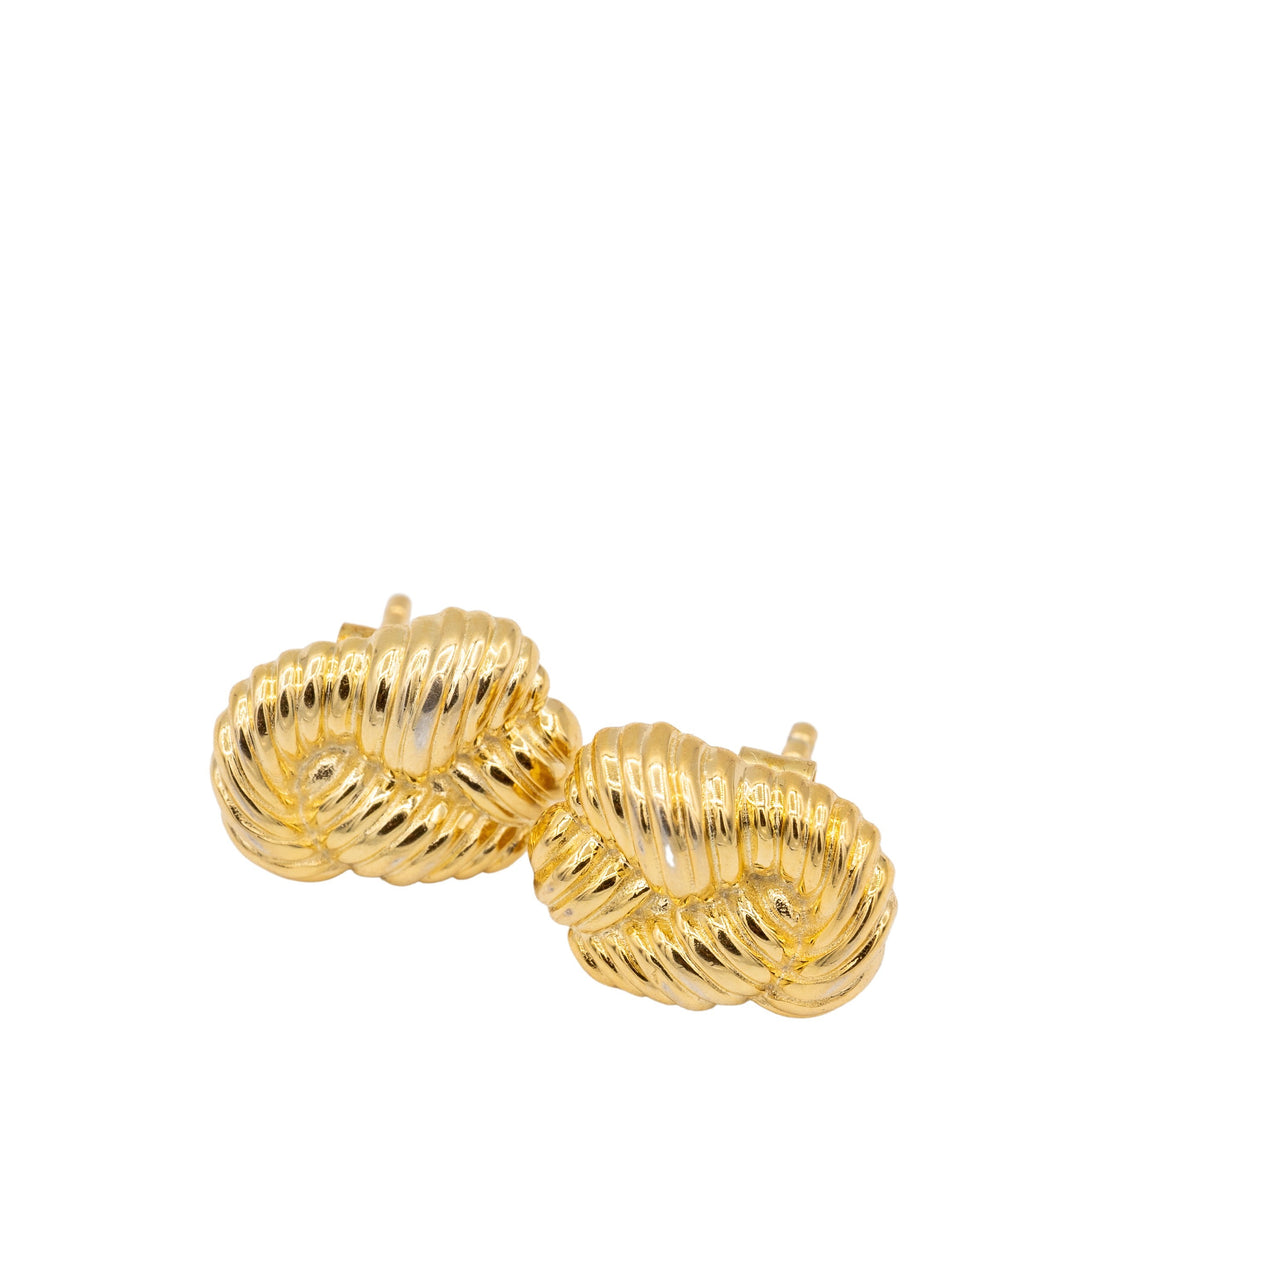 The Twisted Gold Studs